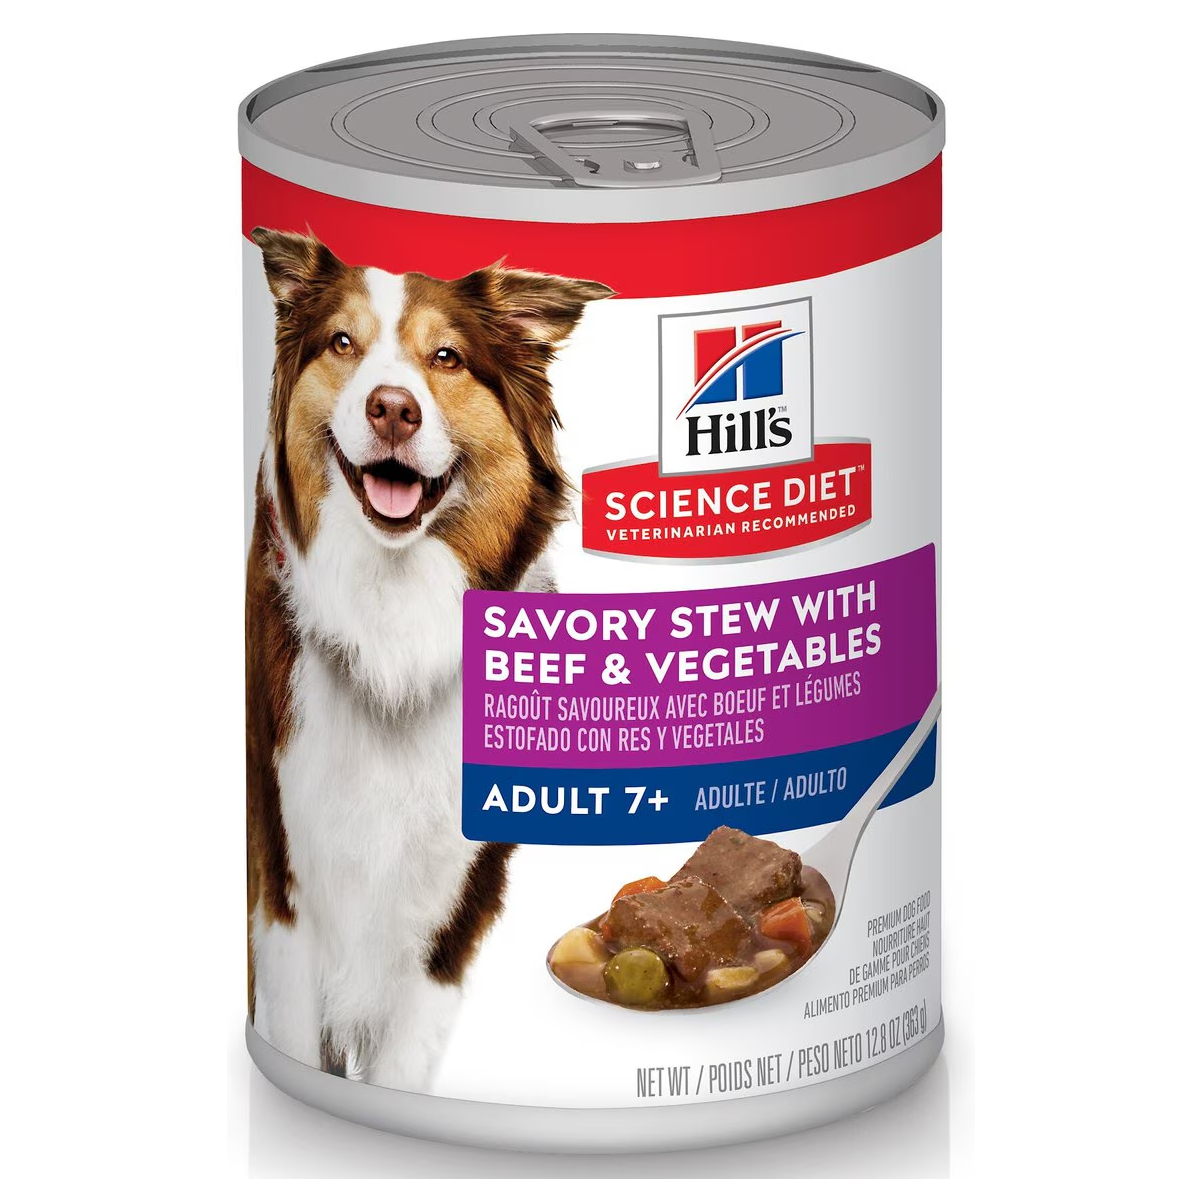 Hill's Science Diet Savory Beef Stew Dog Food